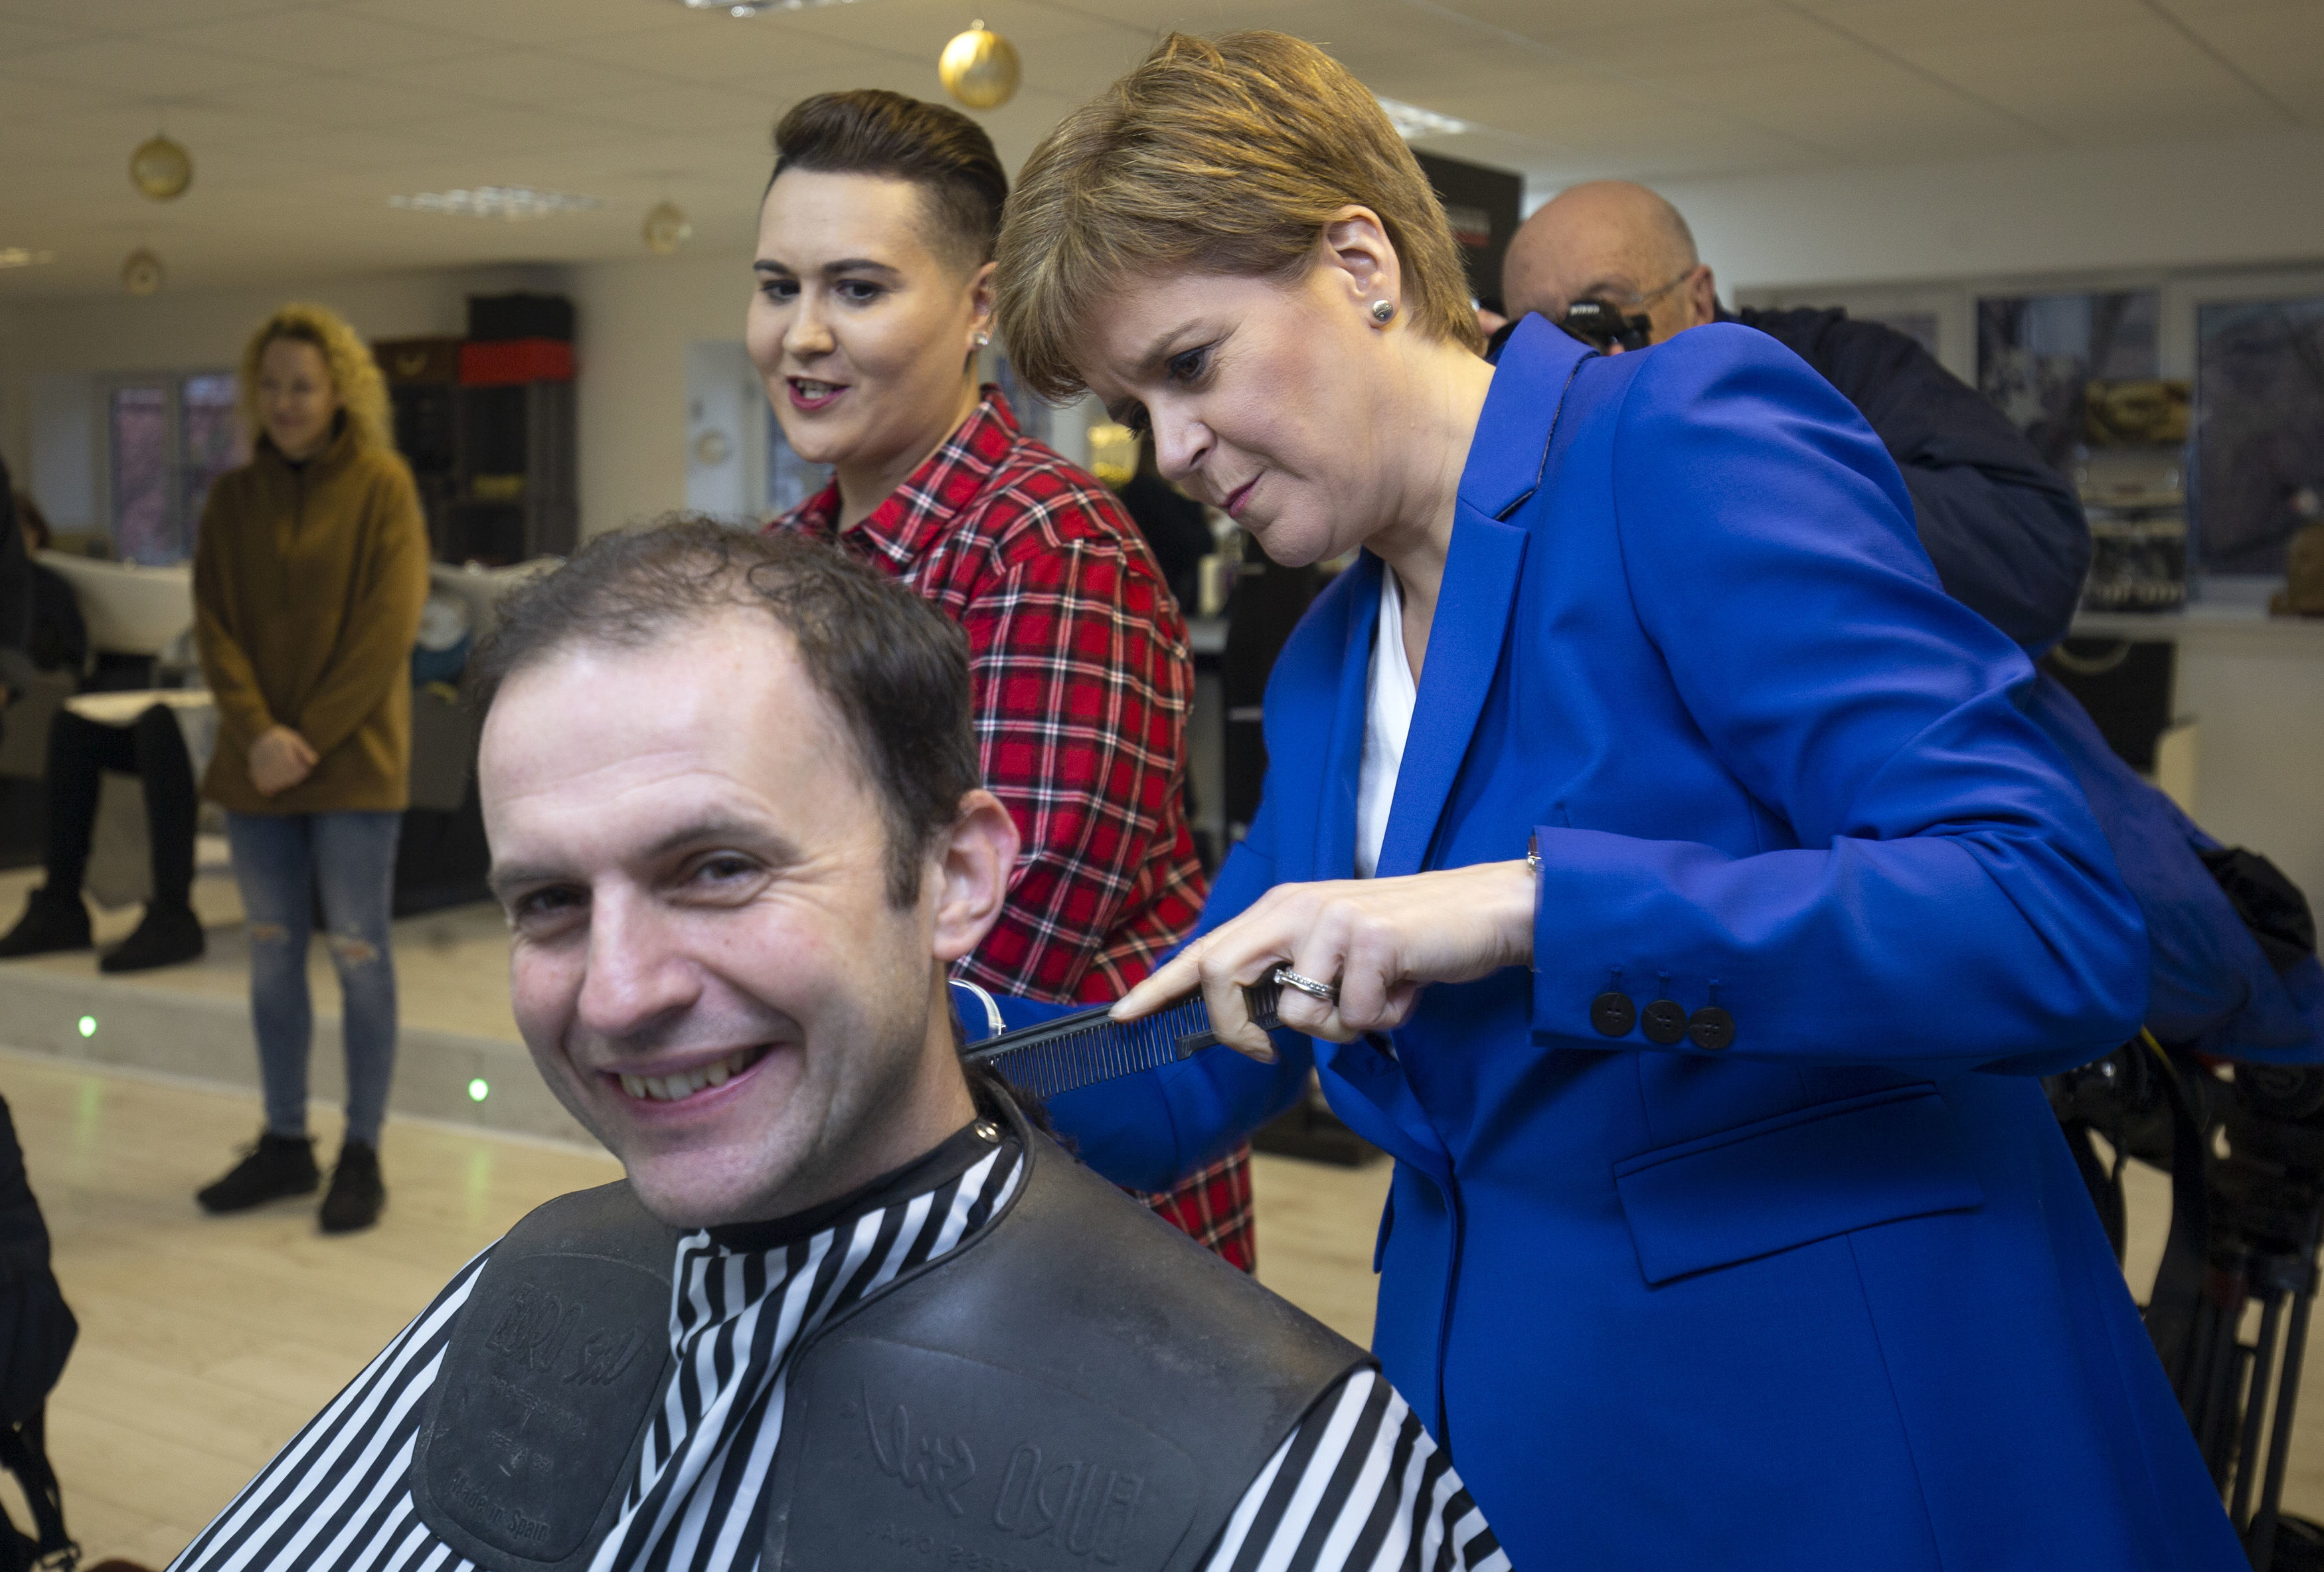 Nicola Sturgeon gives her party's candidate for North East Fife Stephen Gethins a haircut, during a visit to Craig Boyd Hairdressing in Leven, Fife.